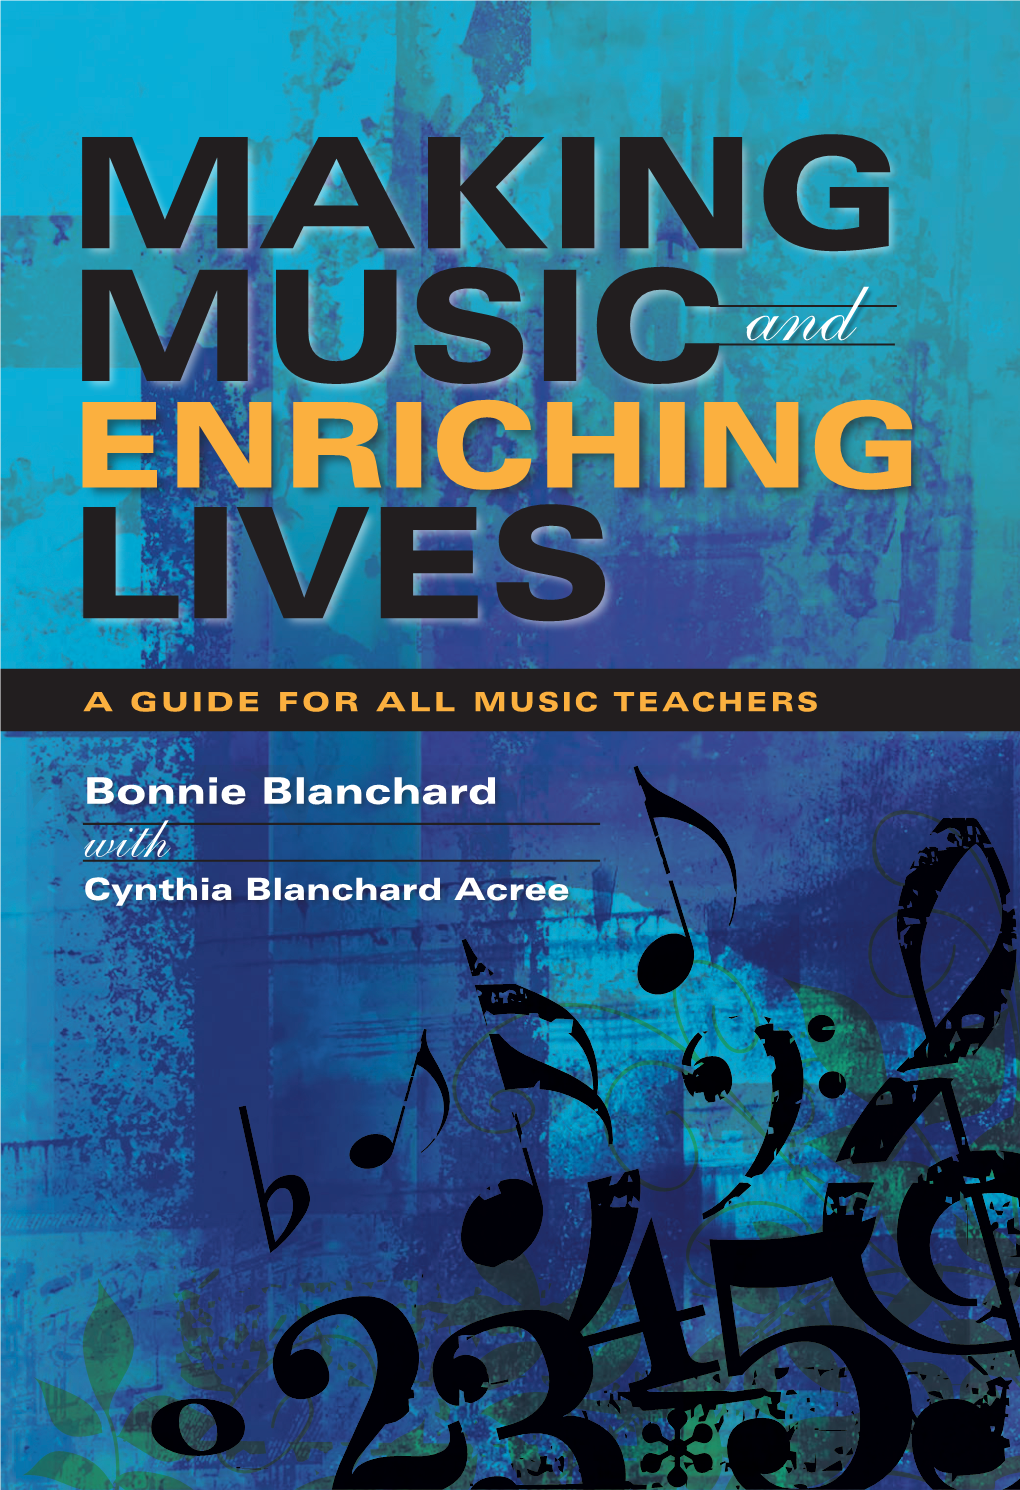 Making Music and Enriching Lives: a Guide for All Music Teachers